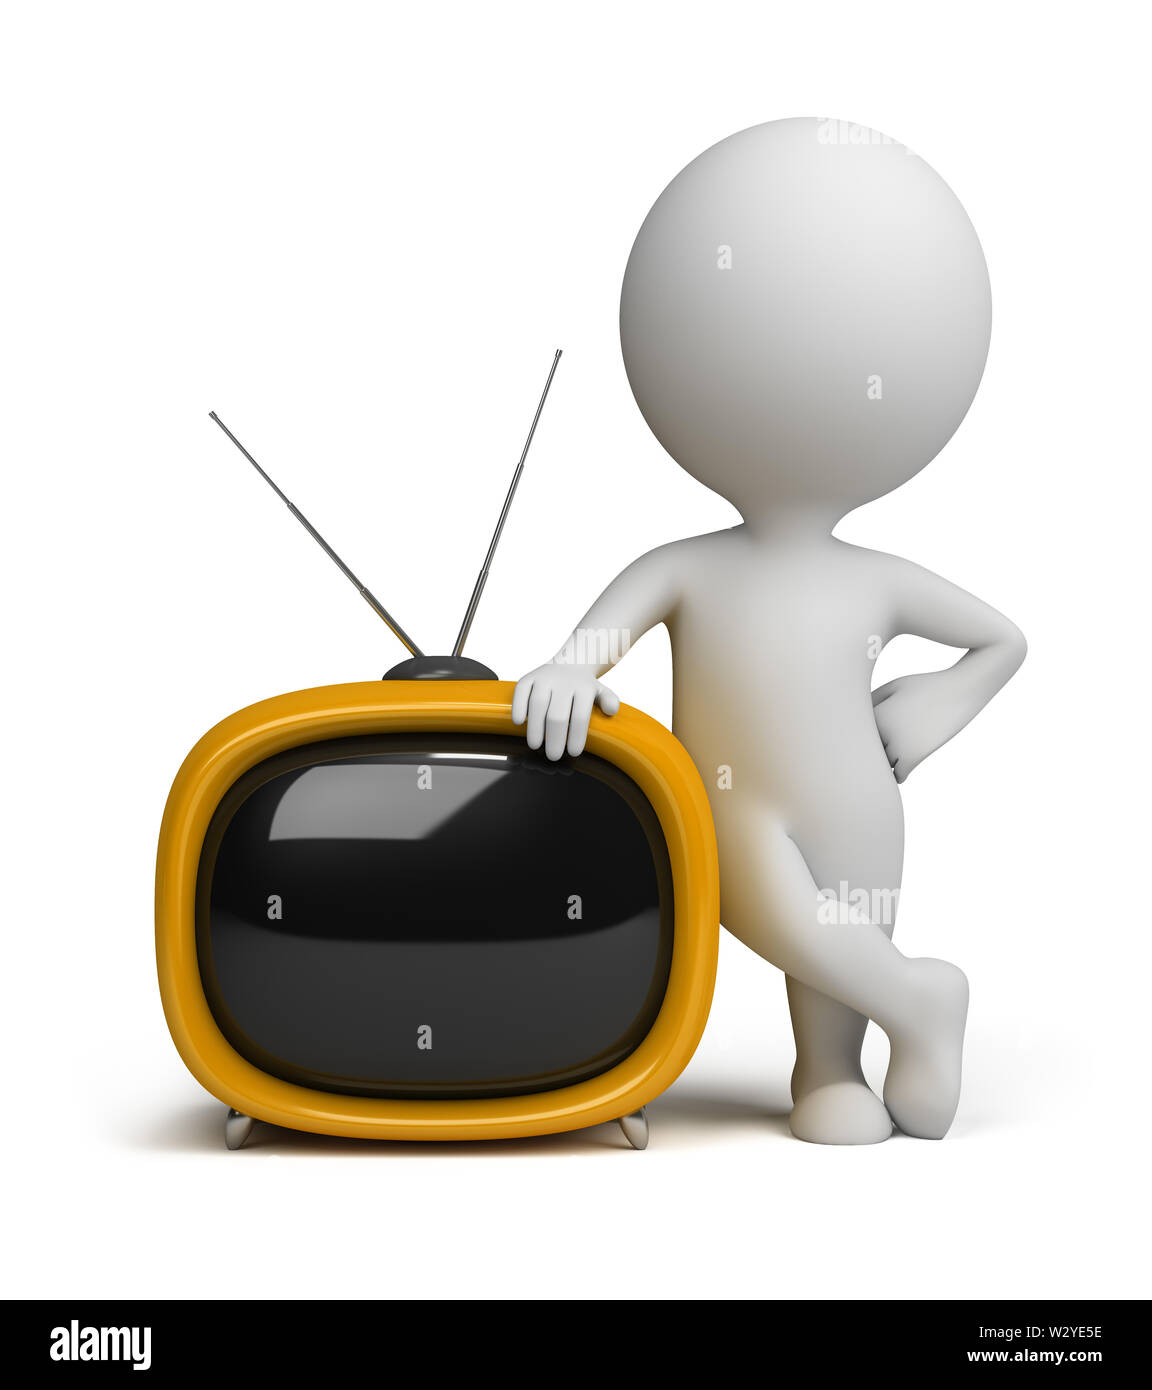 3d small person standing next to a yellow retro TV. 3d image. Isolated white background. Stock Photo